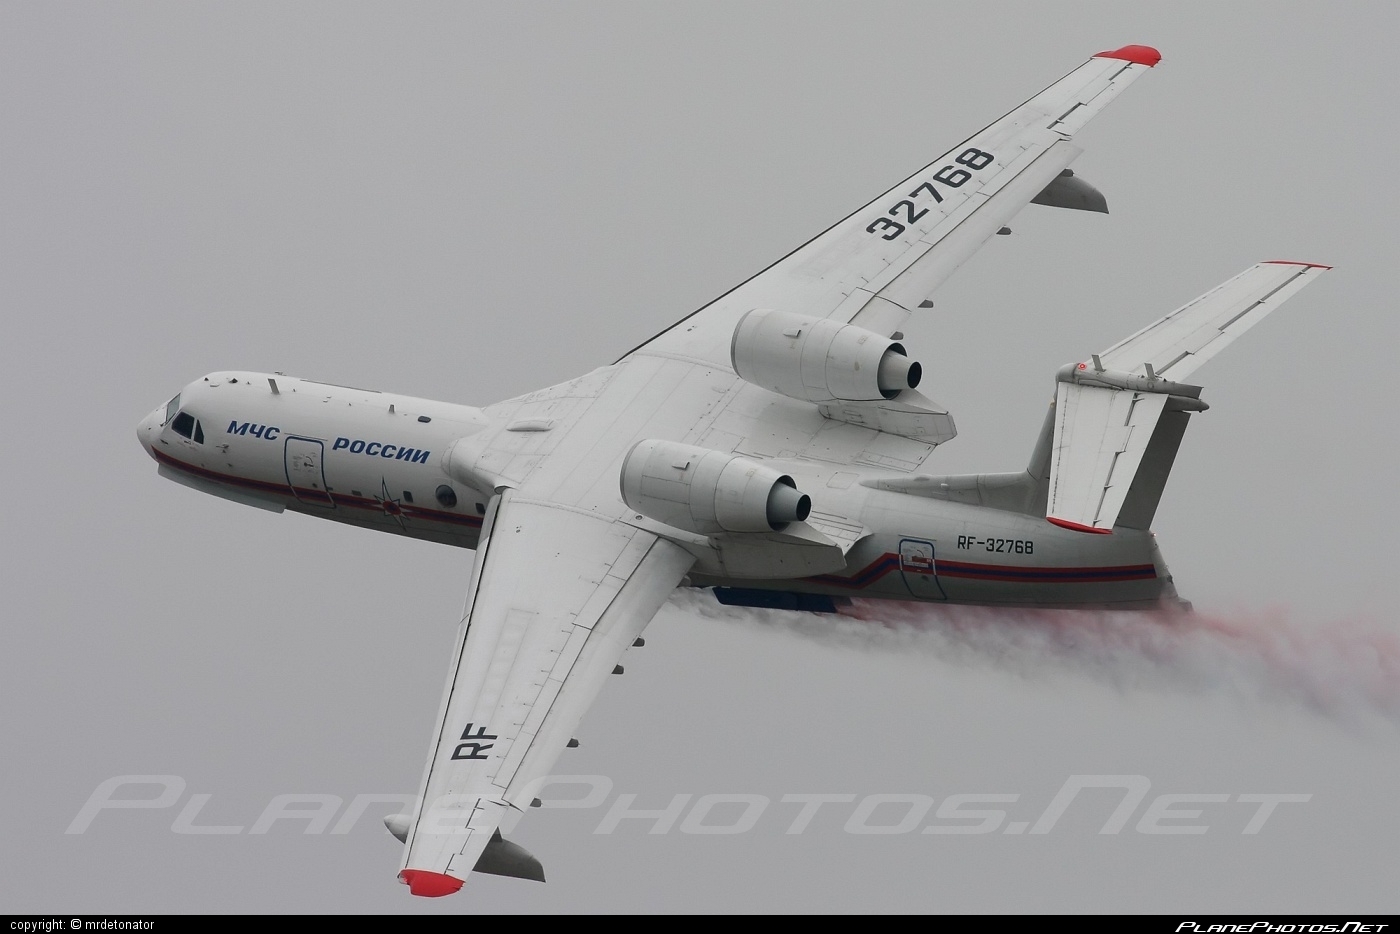 Beriev Be-200ChS - RF-32768 operated by Russia - Ministry for Emergency Situations (MChS) #be200 #be200chs #be200es #beriev #beriev200 #beriev200chs #beriev200es #berievbe200 #berievbe200chs #berievbe200es #maks2009